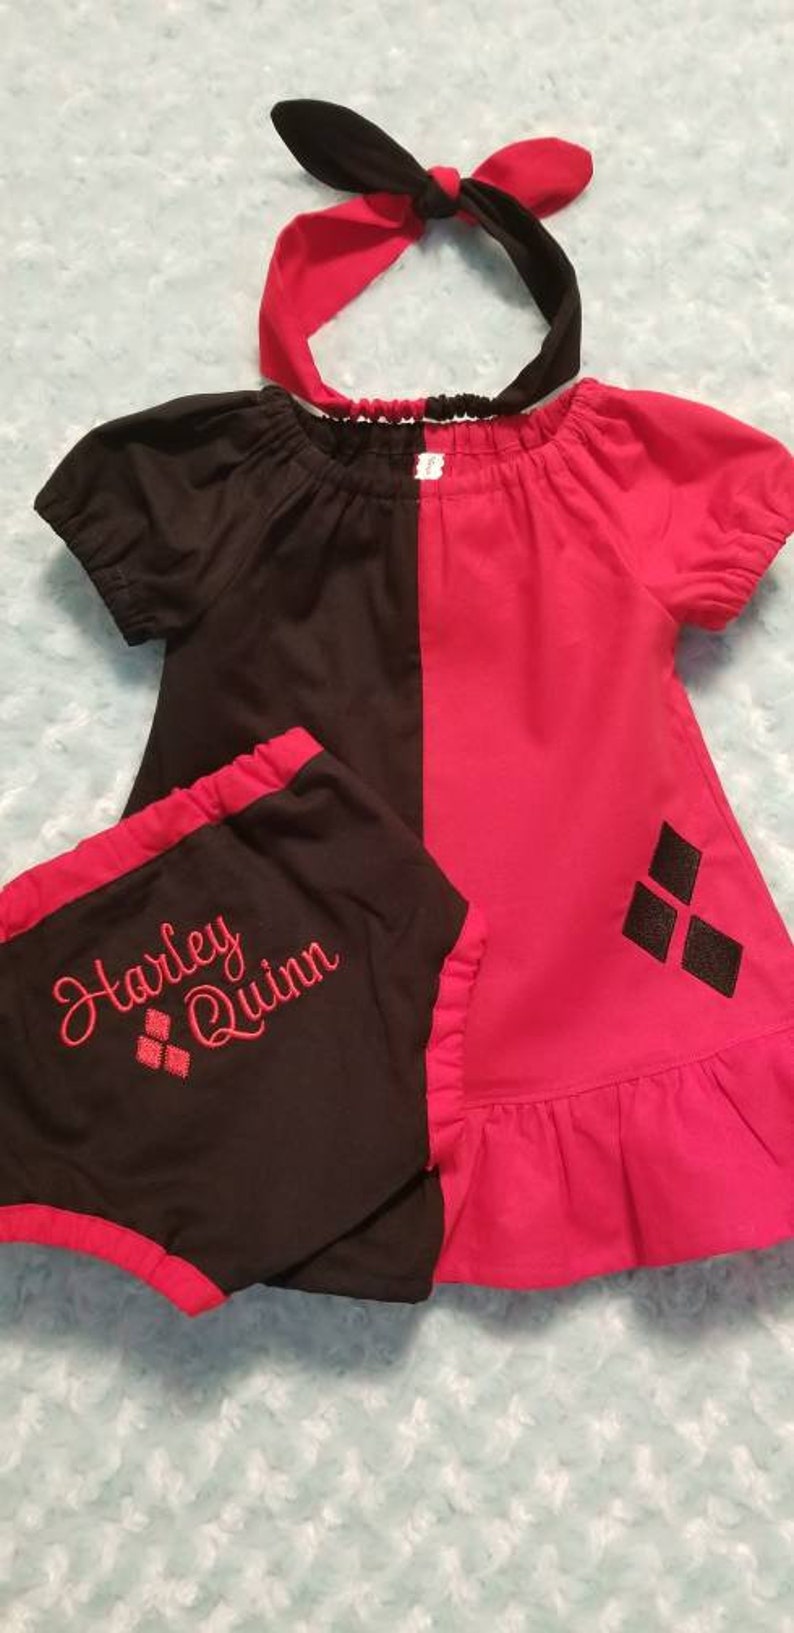 Harley Quinn Childs Peasant Dress Outfit For Any Occasion/ Harley Quinn Outfit/ Peasant Dress Outfit/ Original Harley Quinn Outfit image 4